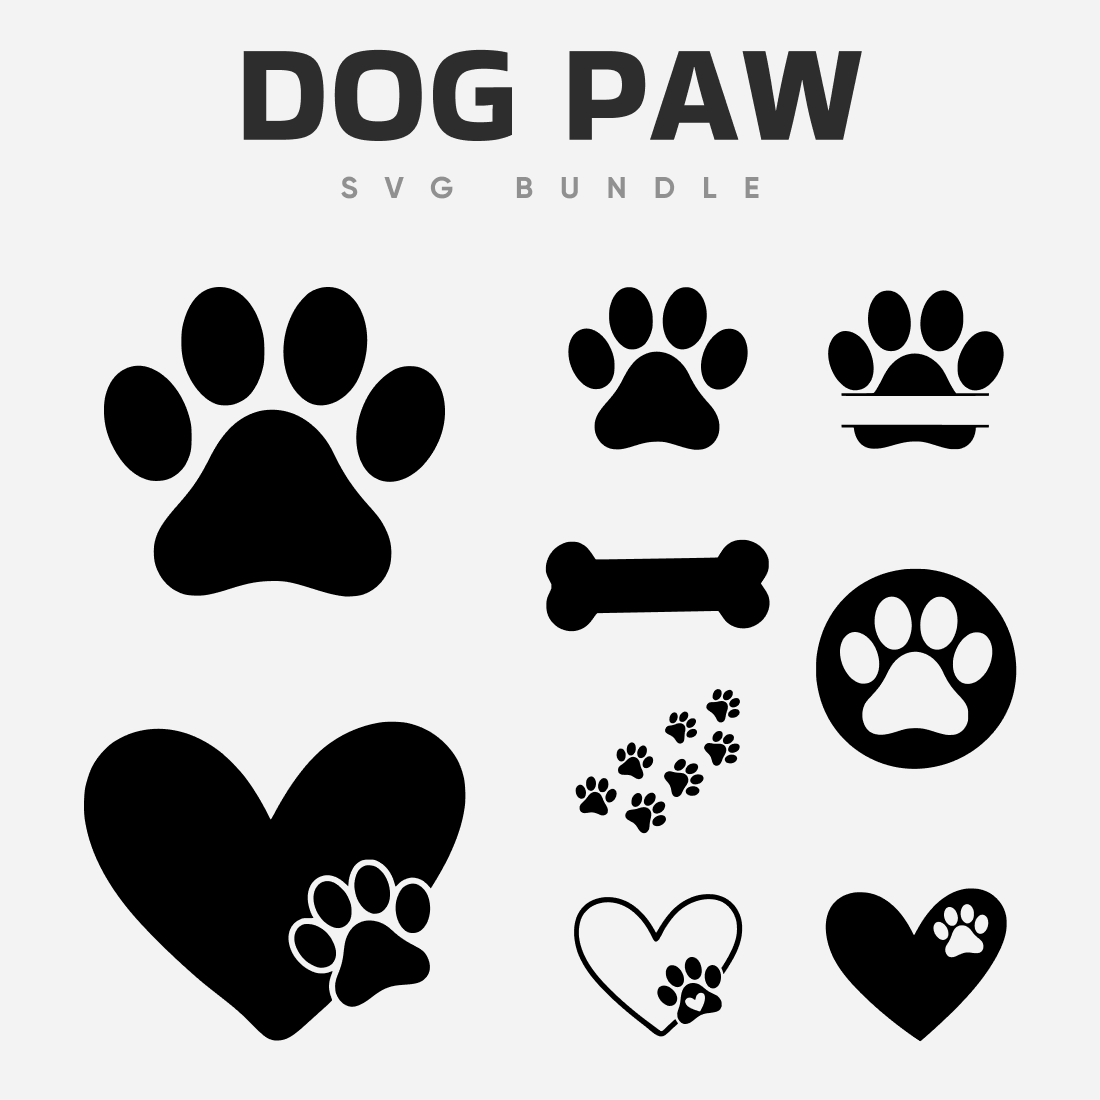 Set of dog paws and hearts.